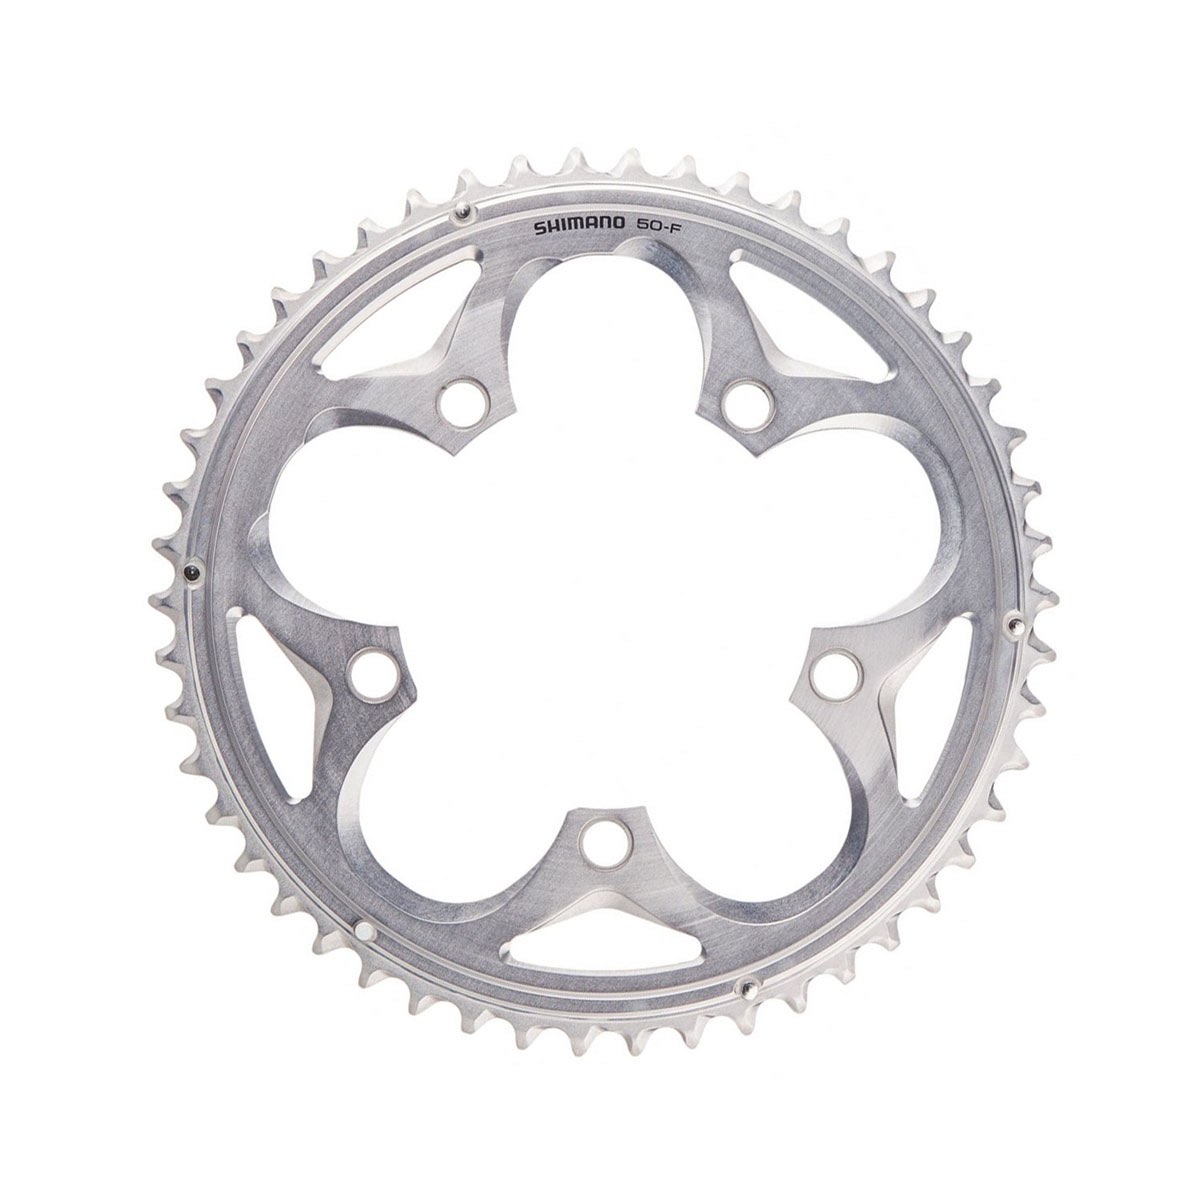 (5750) 105 Compact Chainring